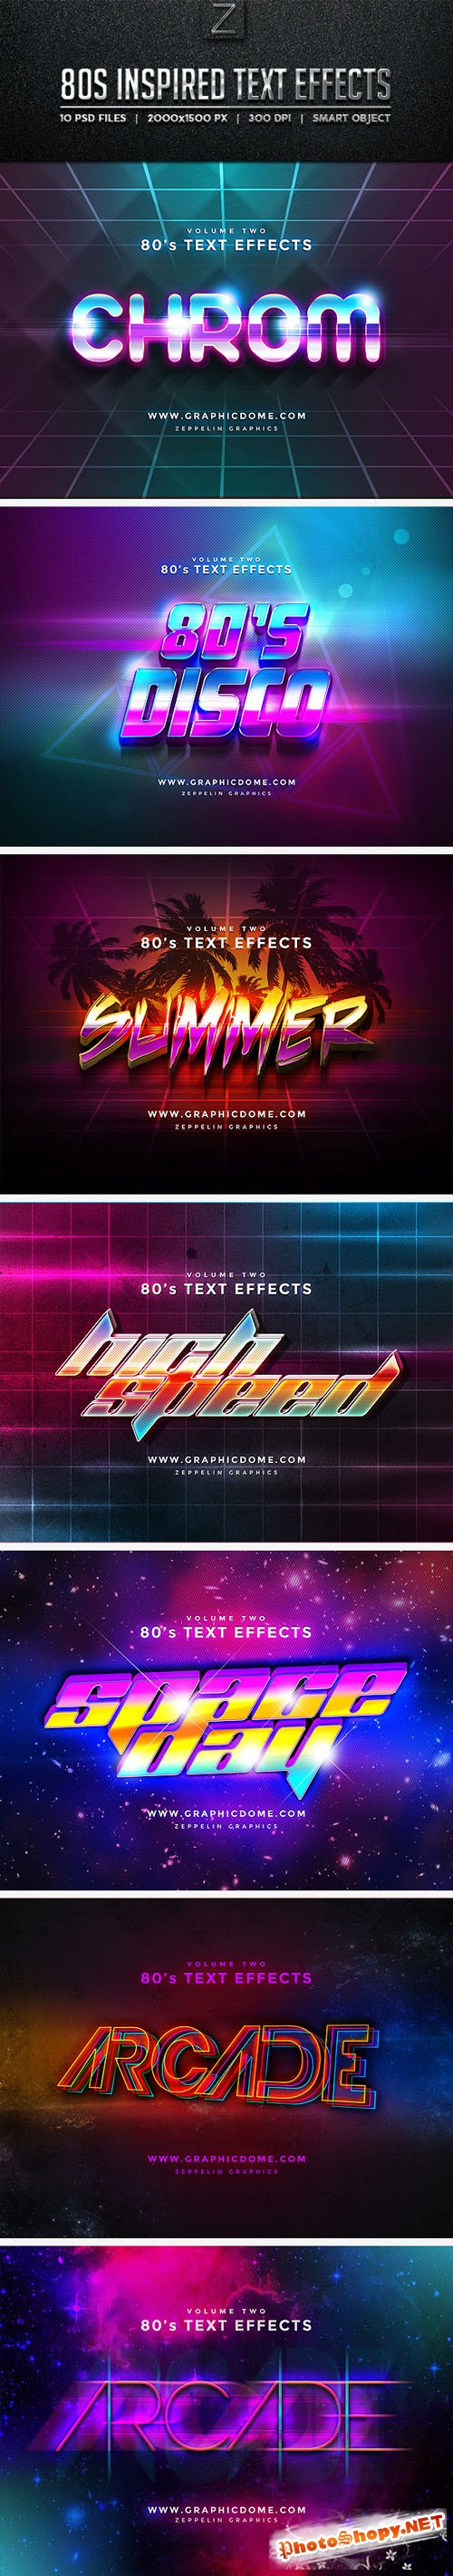 80s Text Effects - Graphicriver 10256165